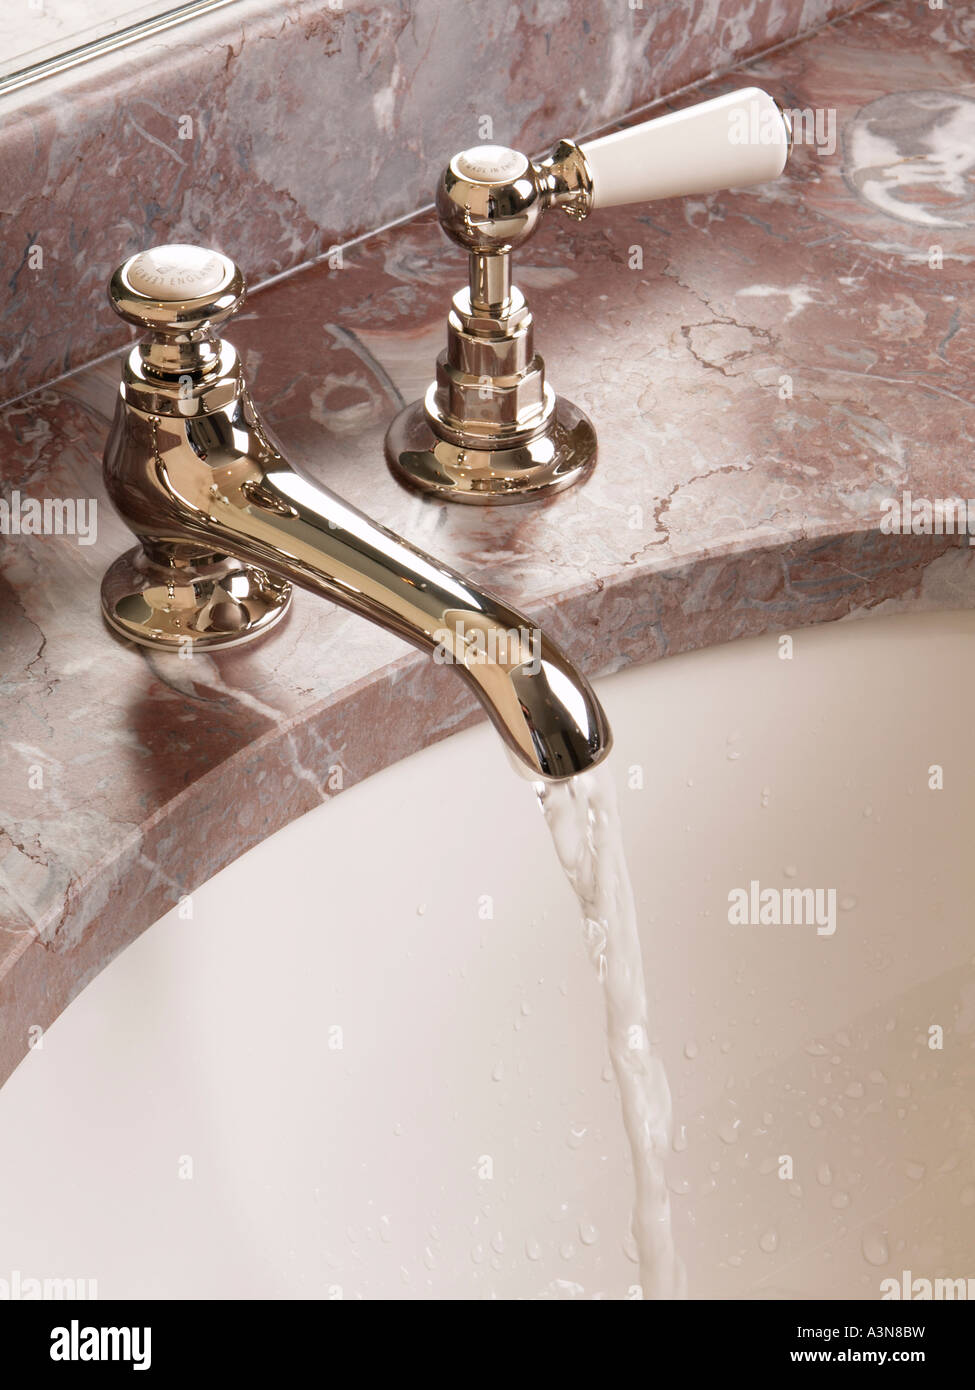 Classic old fashioned bathroom faucet tap on pink marble top sink with running water Stock Photo